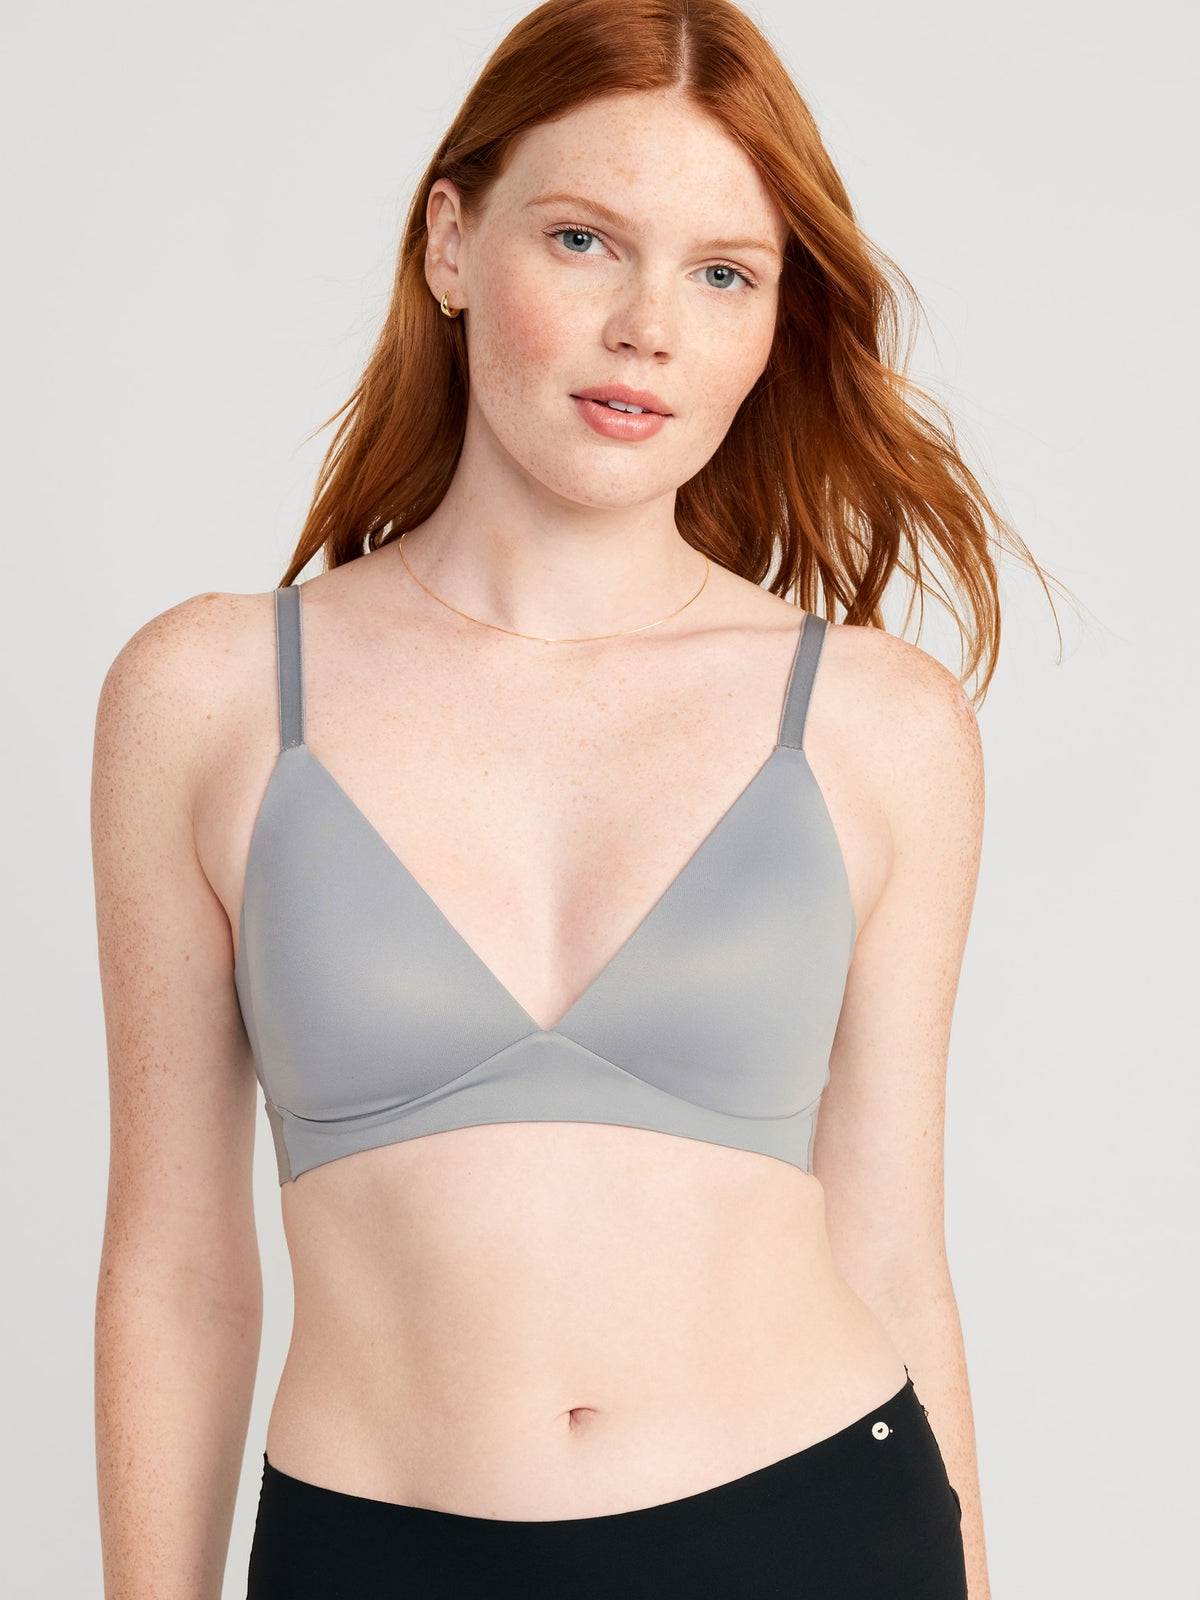 Full-Coverage Molded Wireless Bra for Women - Old Navy Philippines